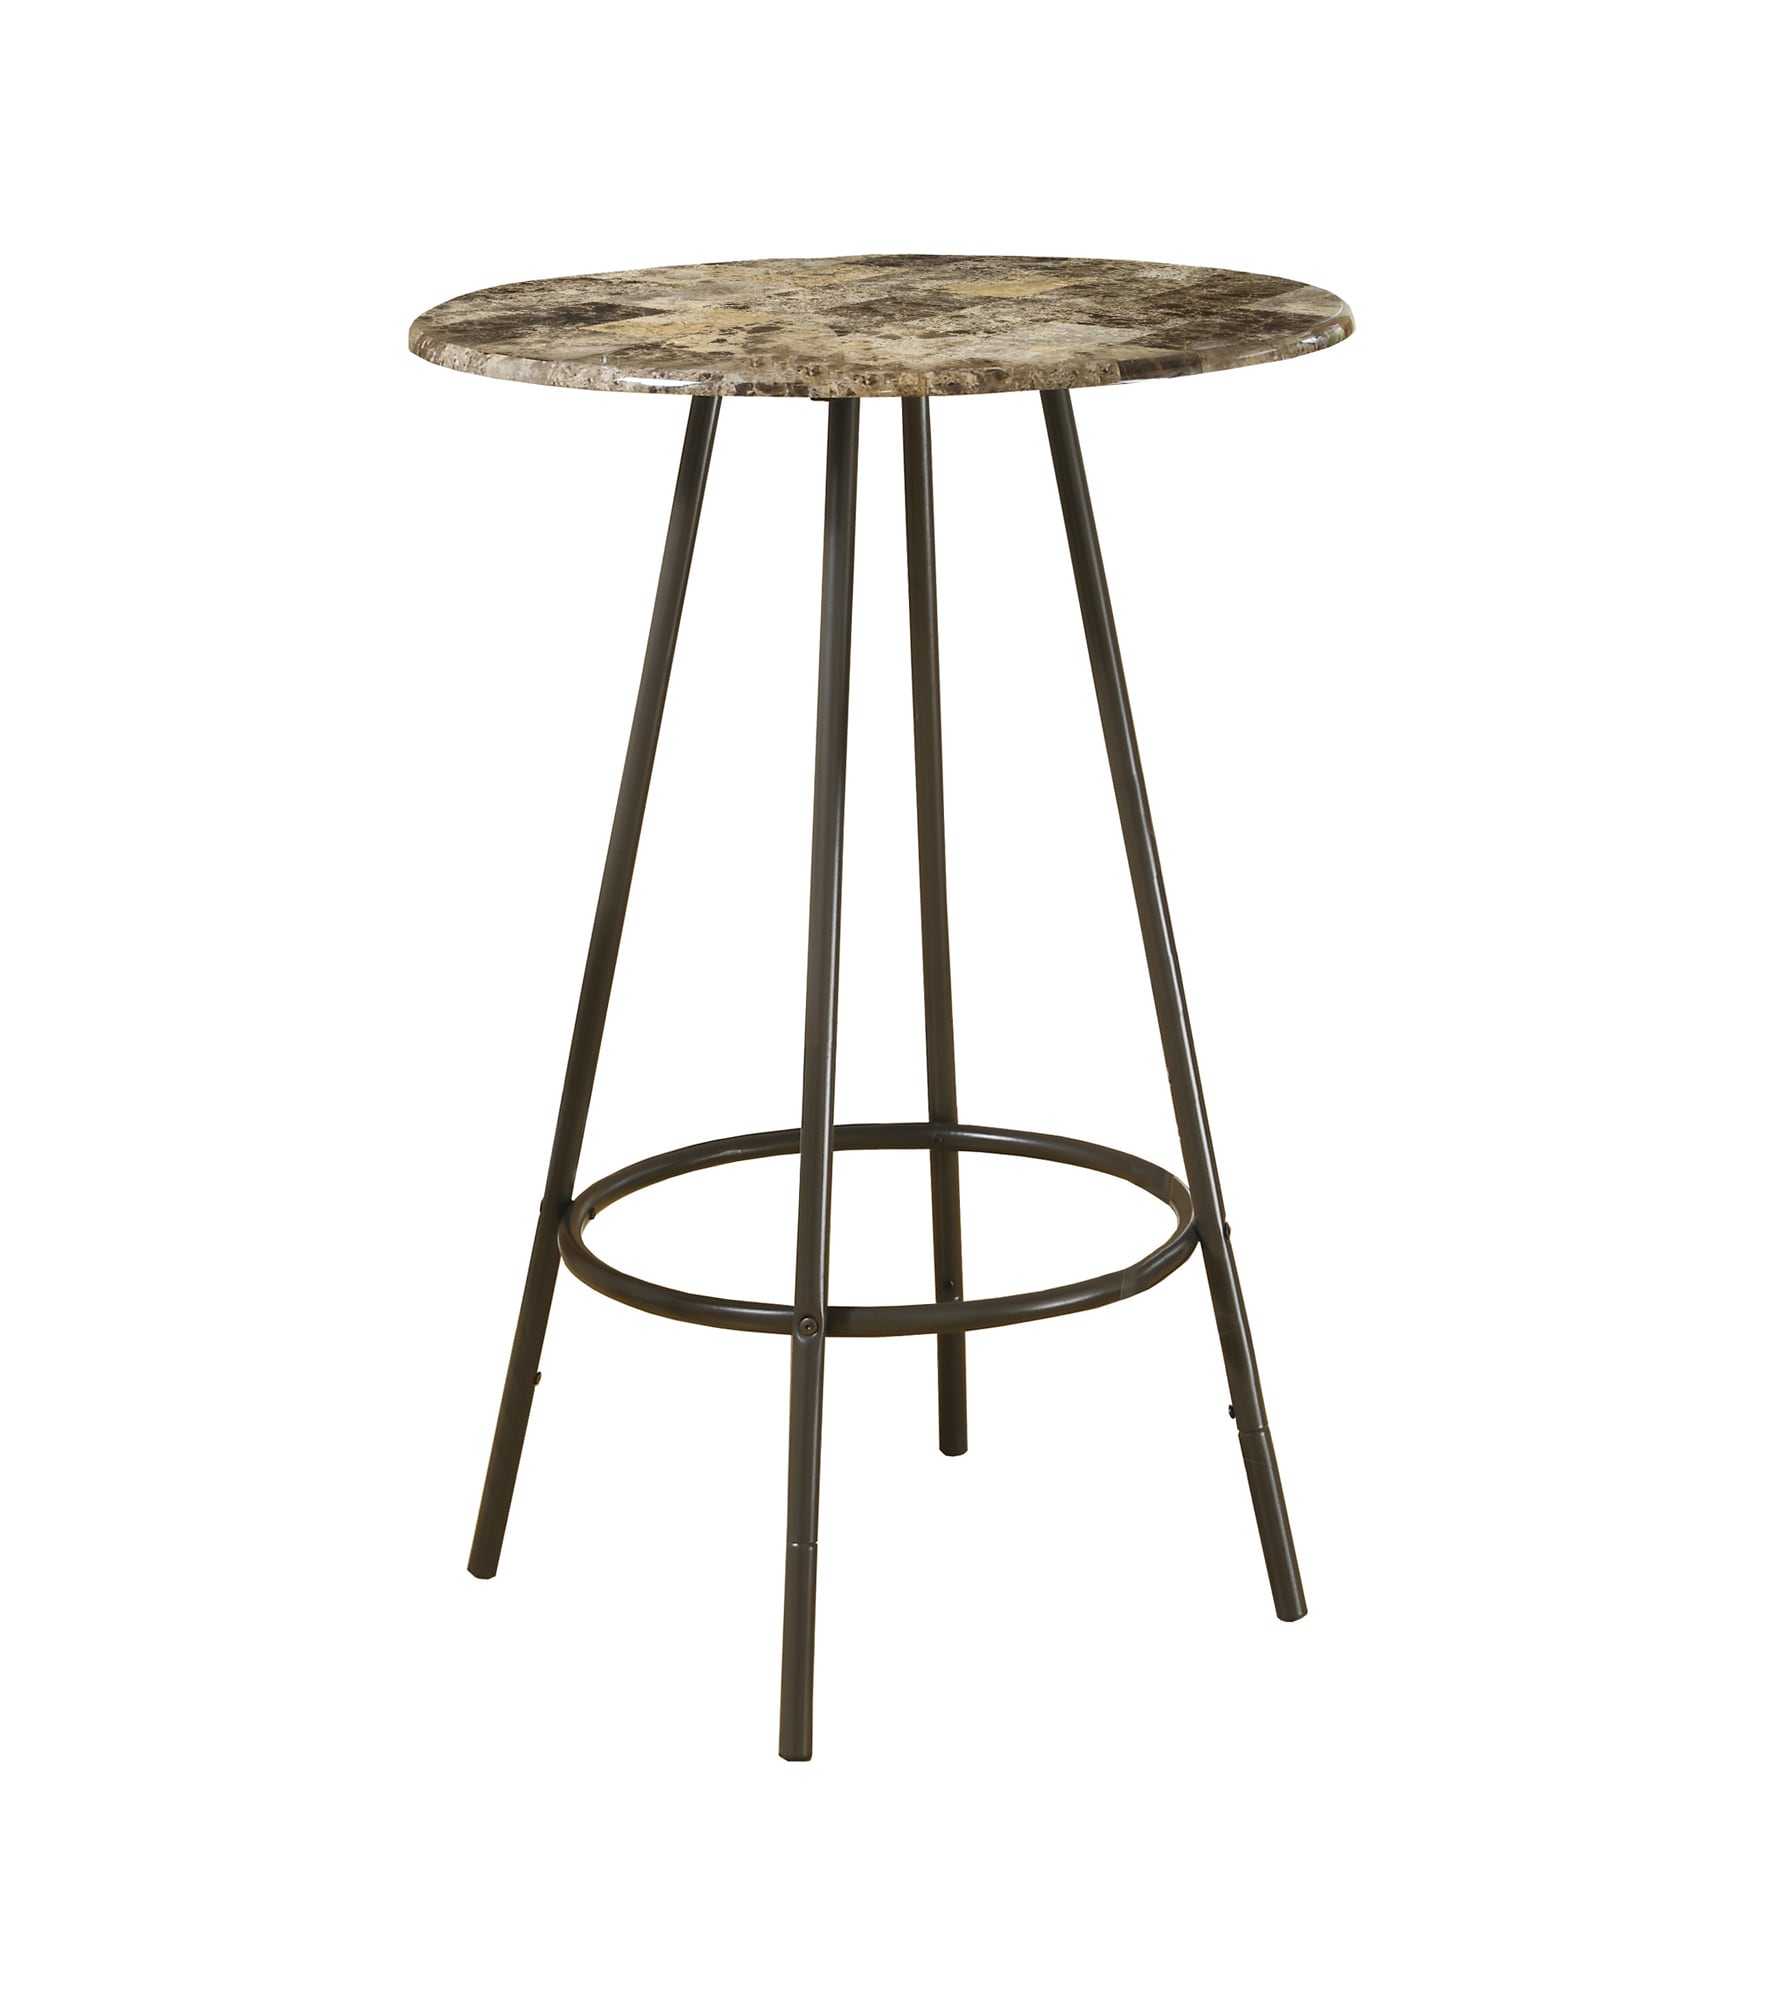 Metal Specialties at Marble in Tables Brown Round Table, 30-in H x Dining Dark department Transitional Dark Coffee Bar Base with 42-in Monarch Faux the L